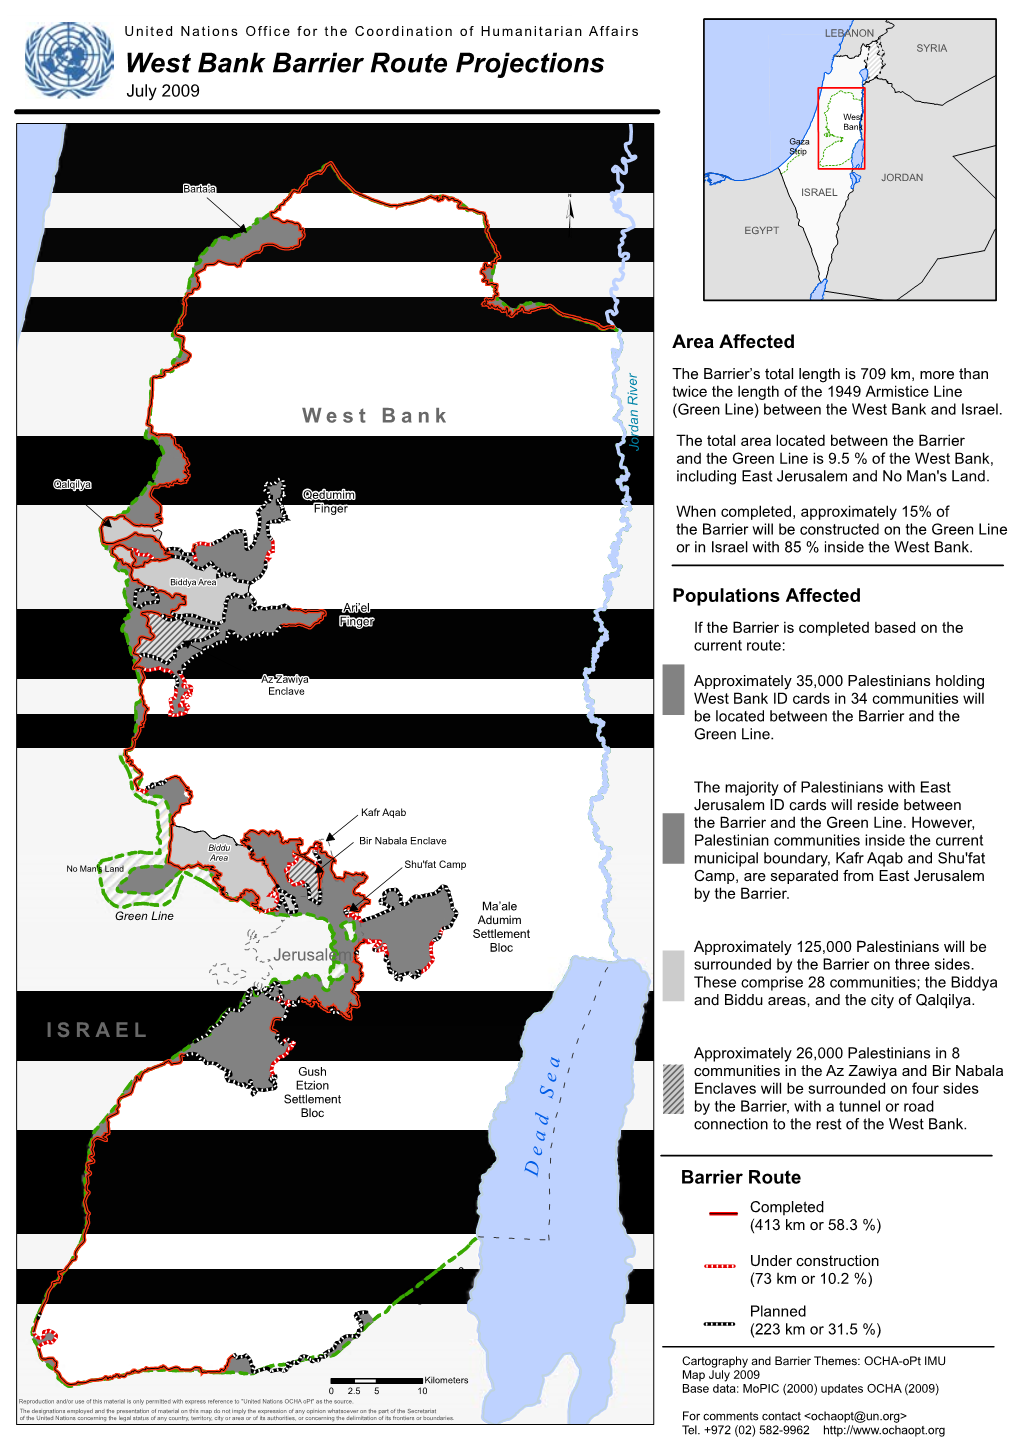 West Bank Barrier Route Projections July 2009